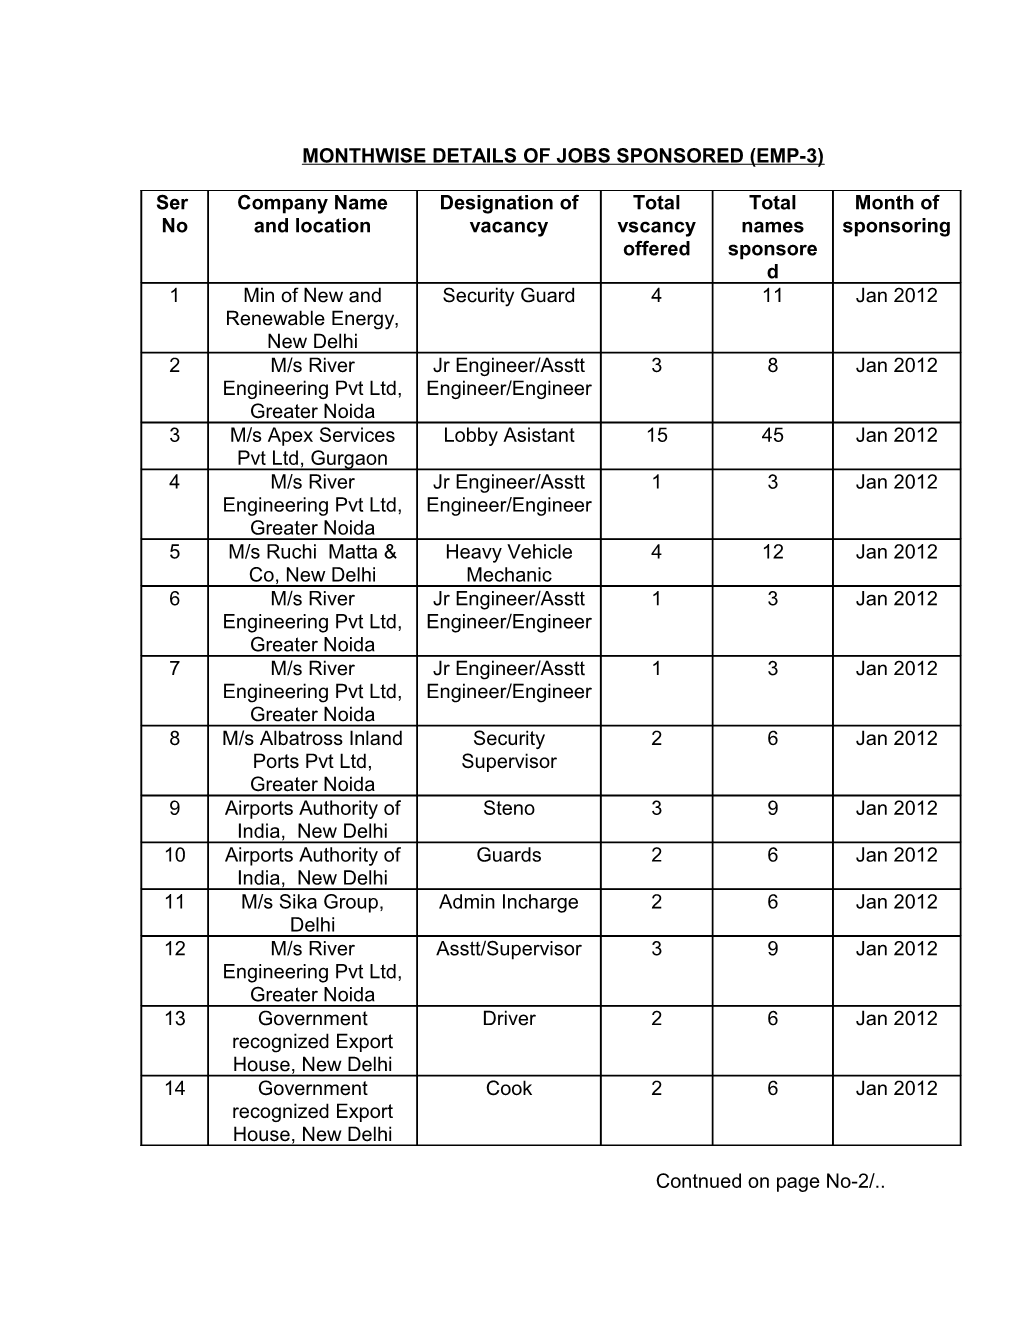 Monthwise Details of Jobs Sponsored (Emp-3)